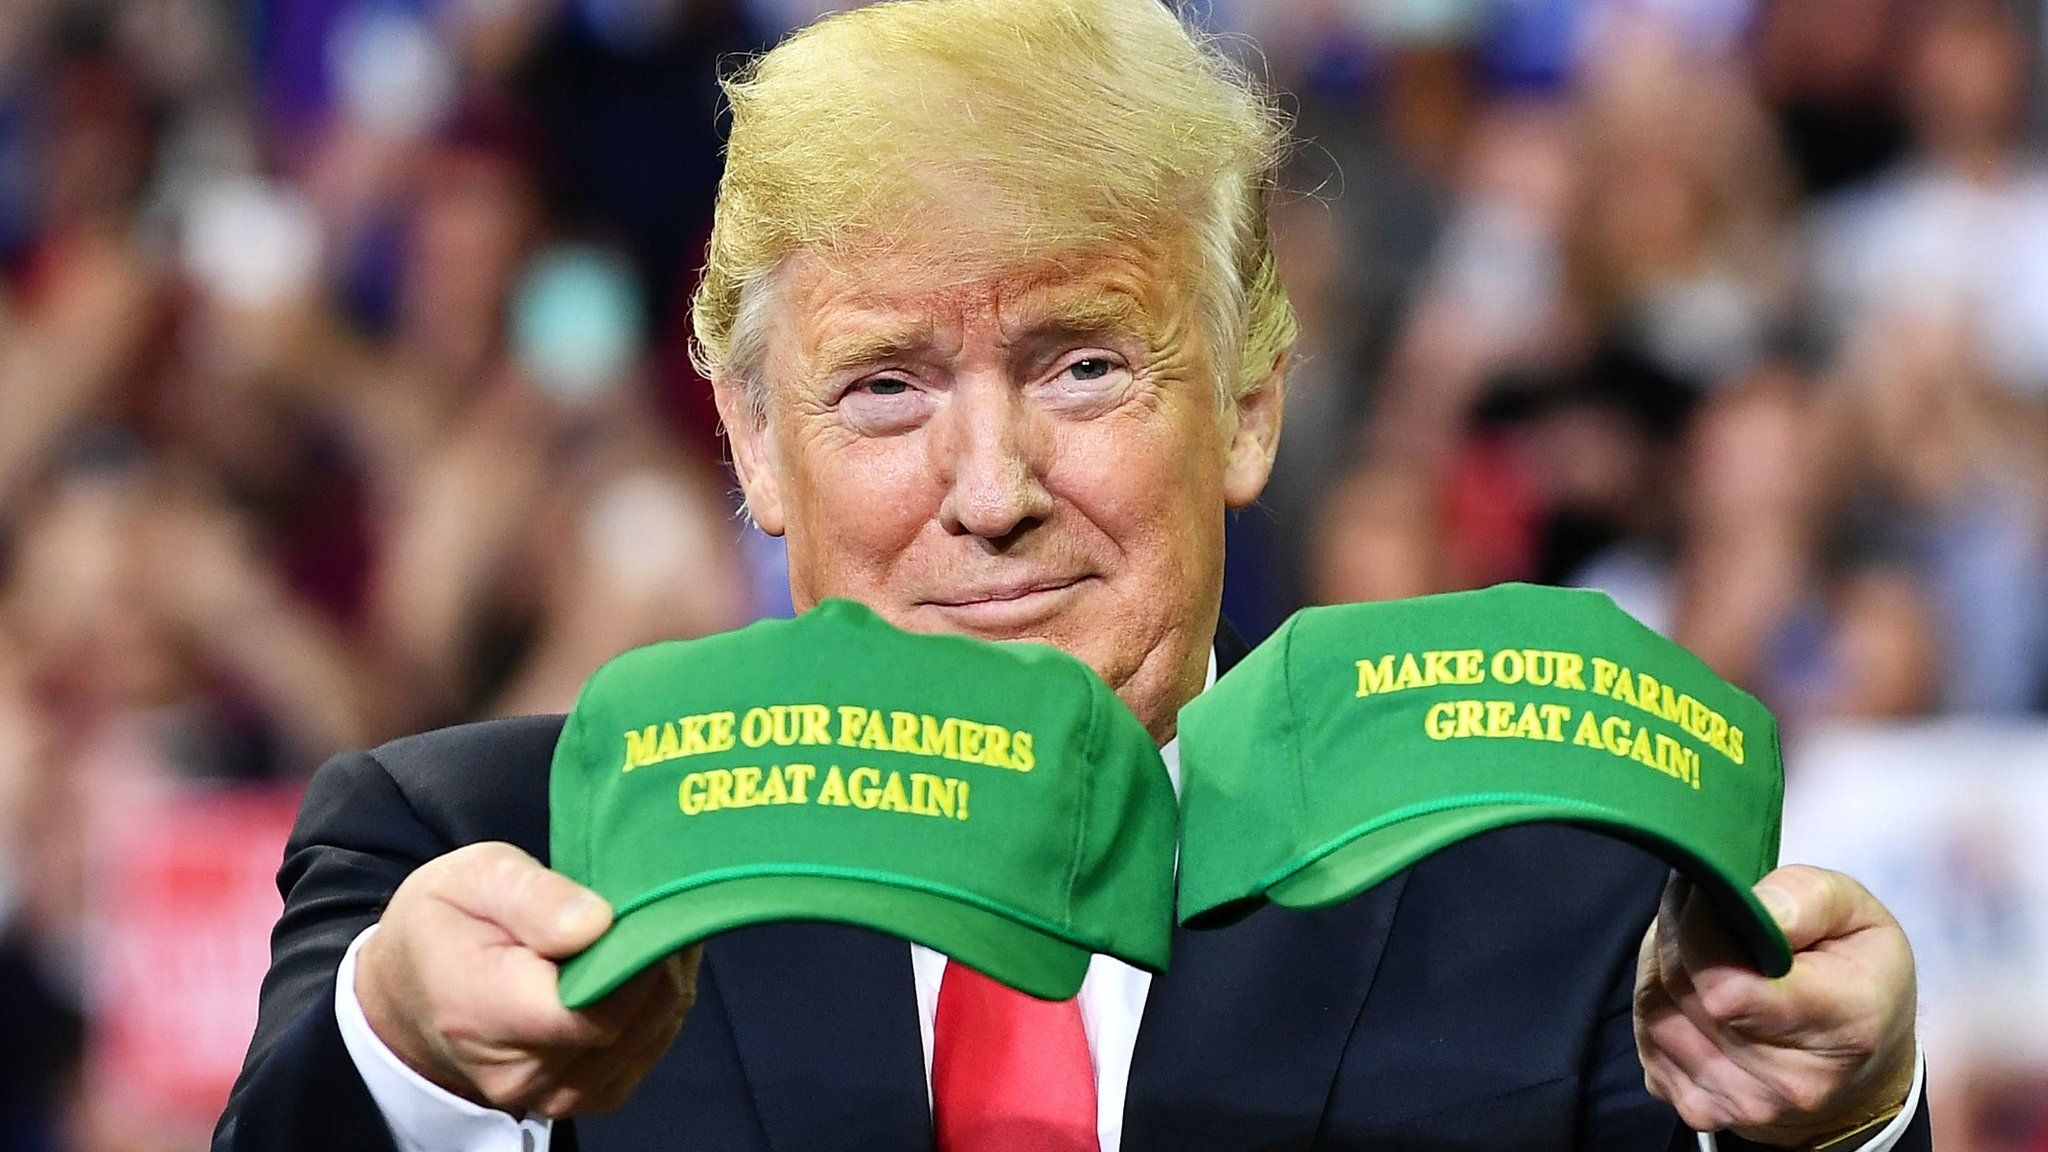 US President Donald Trump displays hats that read: "Make Our Farmers Great Again!" at a campaign rally at Ford Center in Evansville, Indiana on August 30, 2018